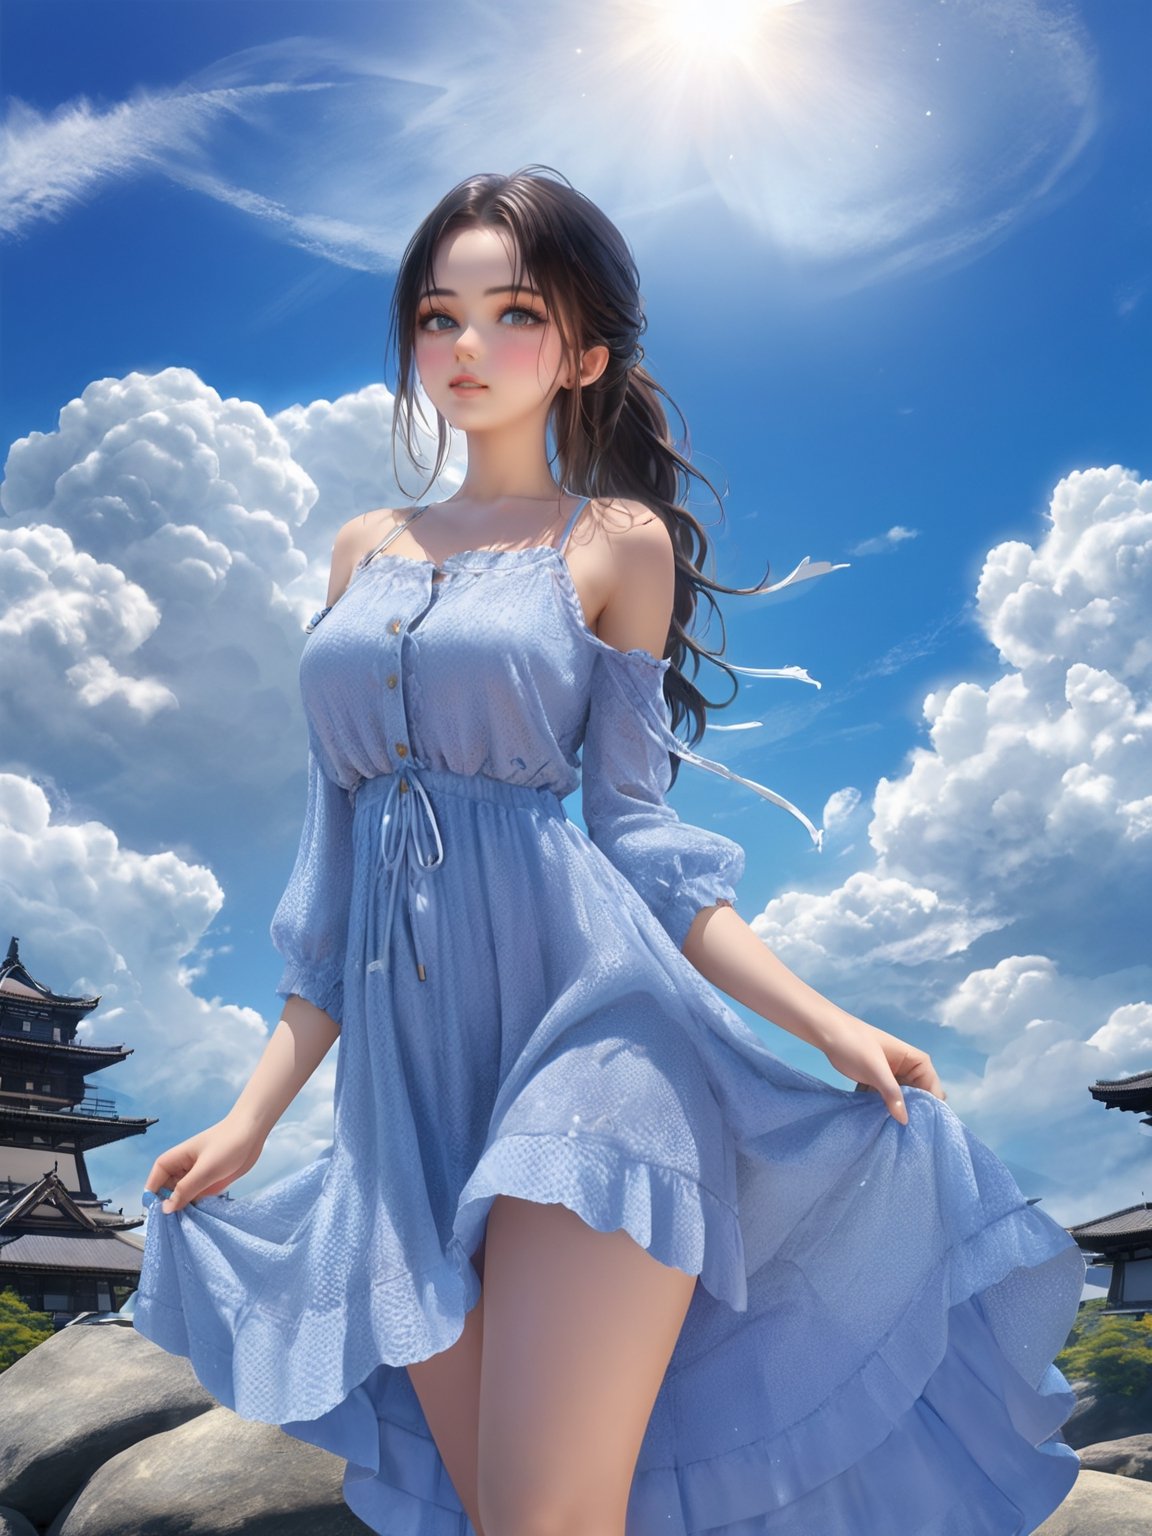 //Quality,
photo r3al, detailmaster2, masterpiece, photorealistic, 8k, 8k UHD, best quality, ultra realistic, ultra detailed, hyperdetailed photography, real photo
,//Character,
1girl, solo
,//Fashion,
,//Background,
sky
,//Others,
,AsanagiStyle,sakimichan style